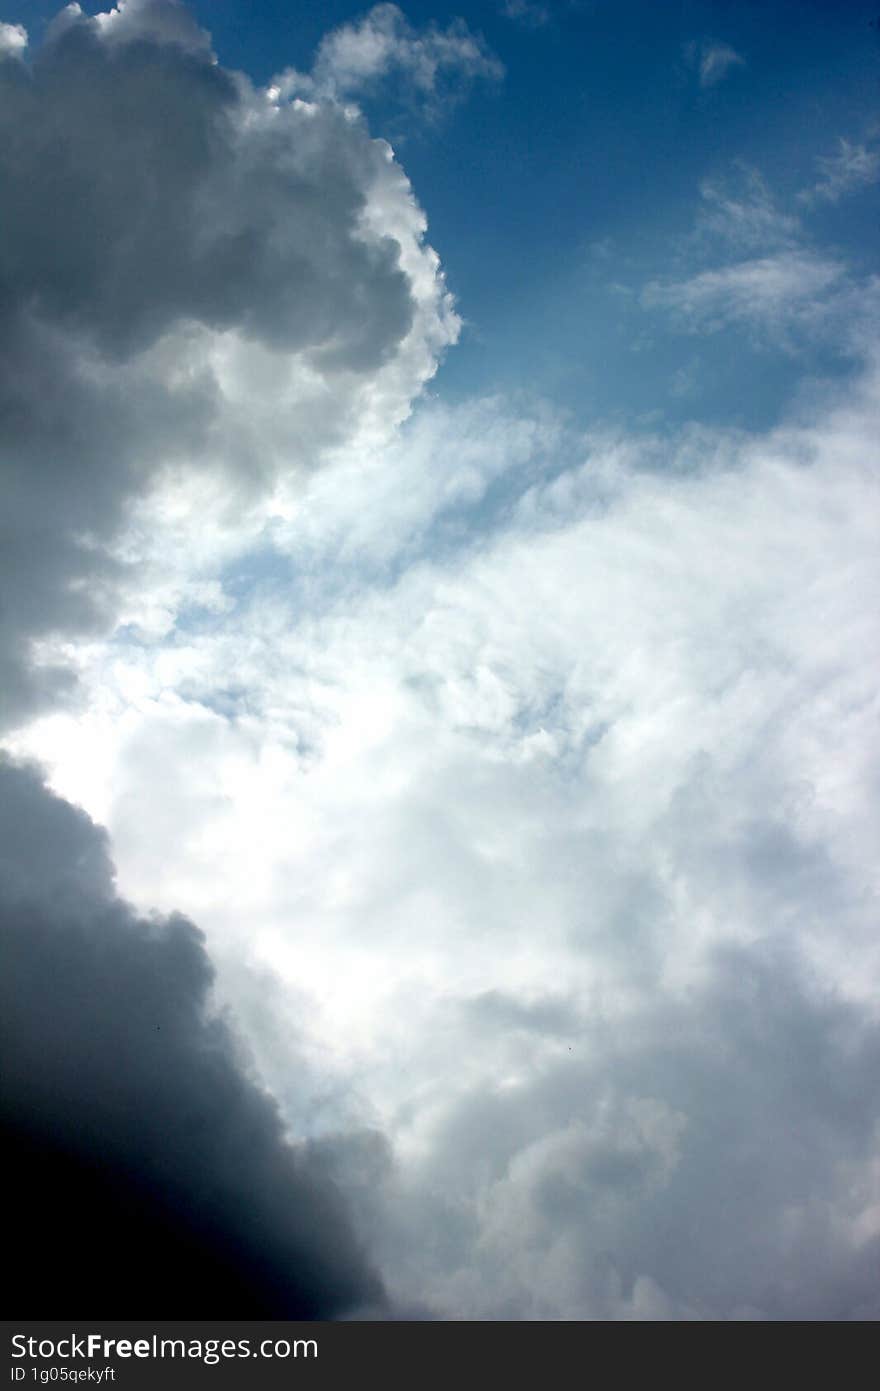 blue sky with white clouds and sun ray, nature cloudscape background. blue sky with white clouds and sun ray, nature cloudscape background